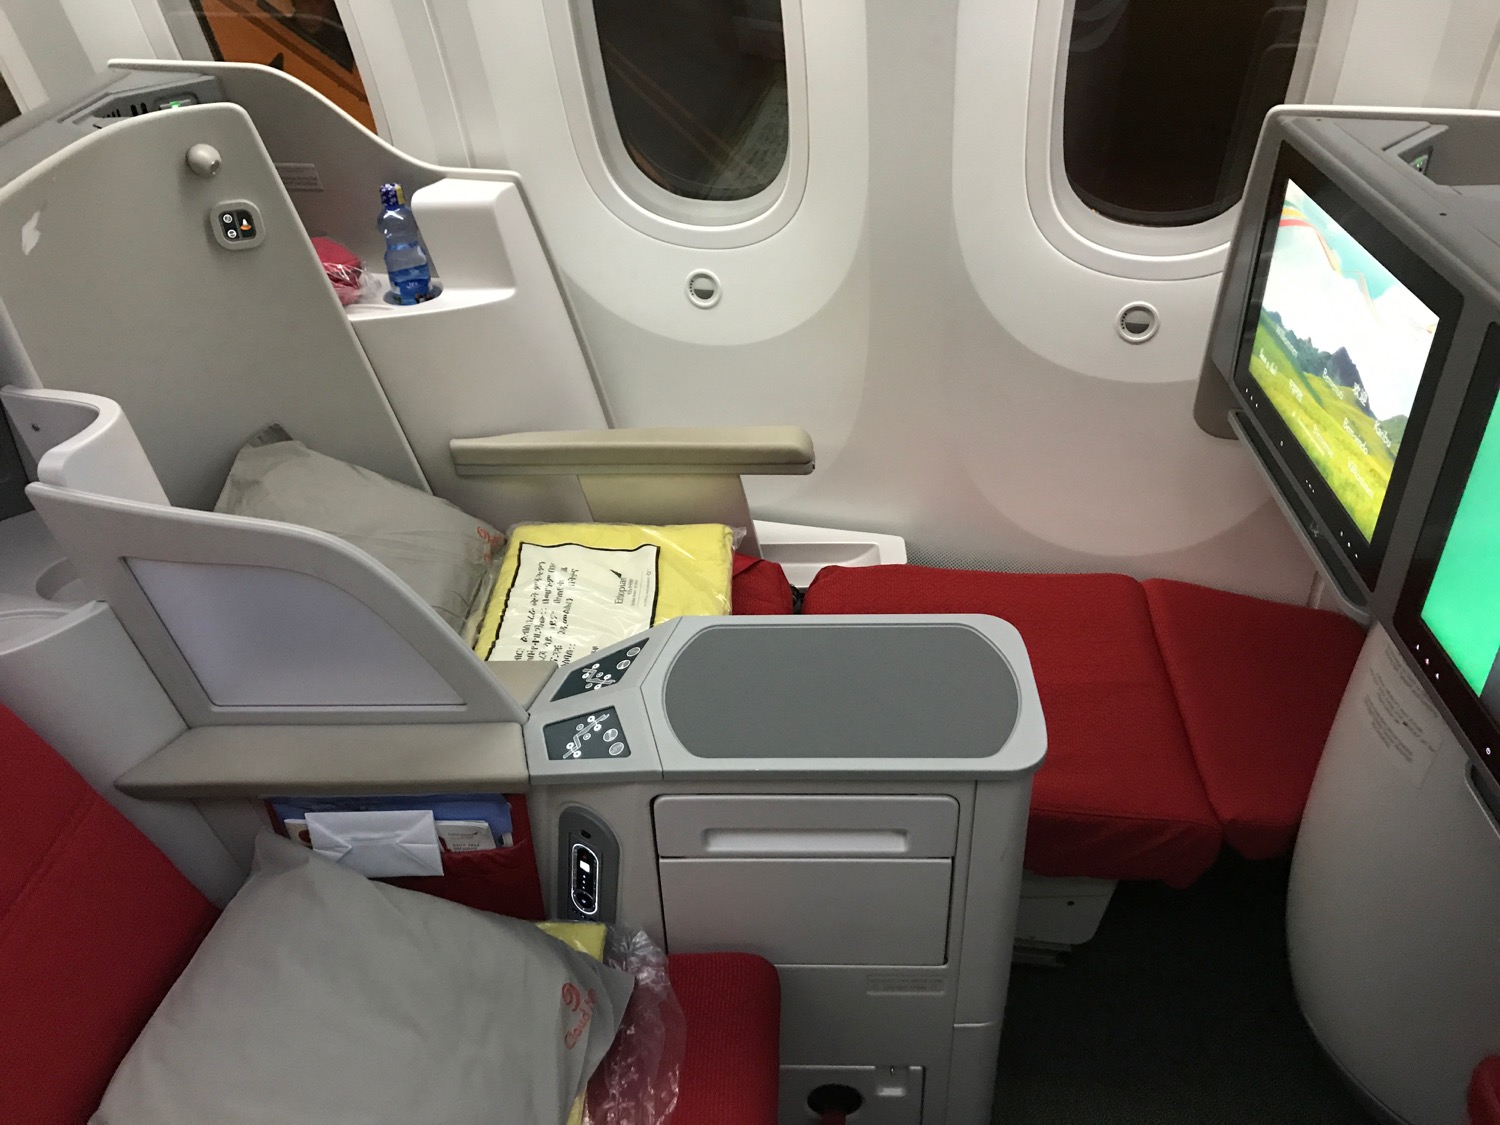 a seat and a tv in a plane